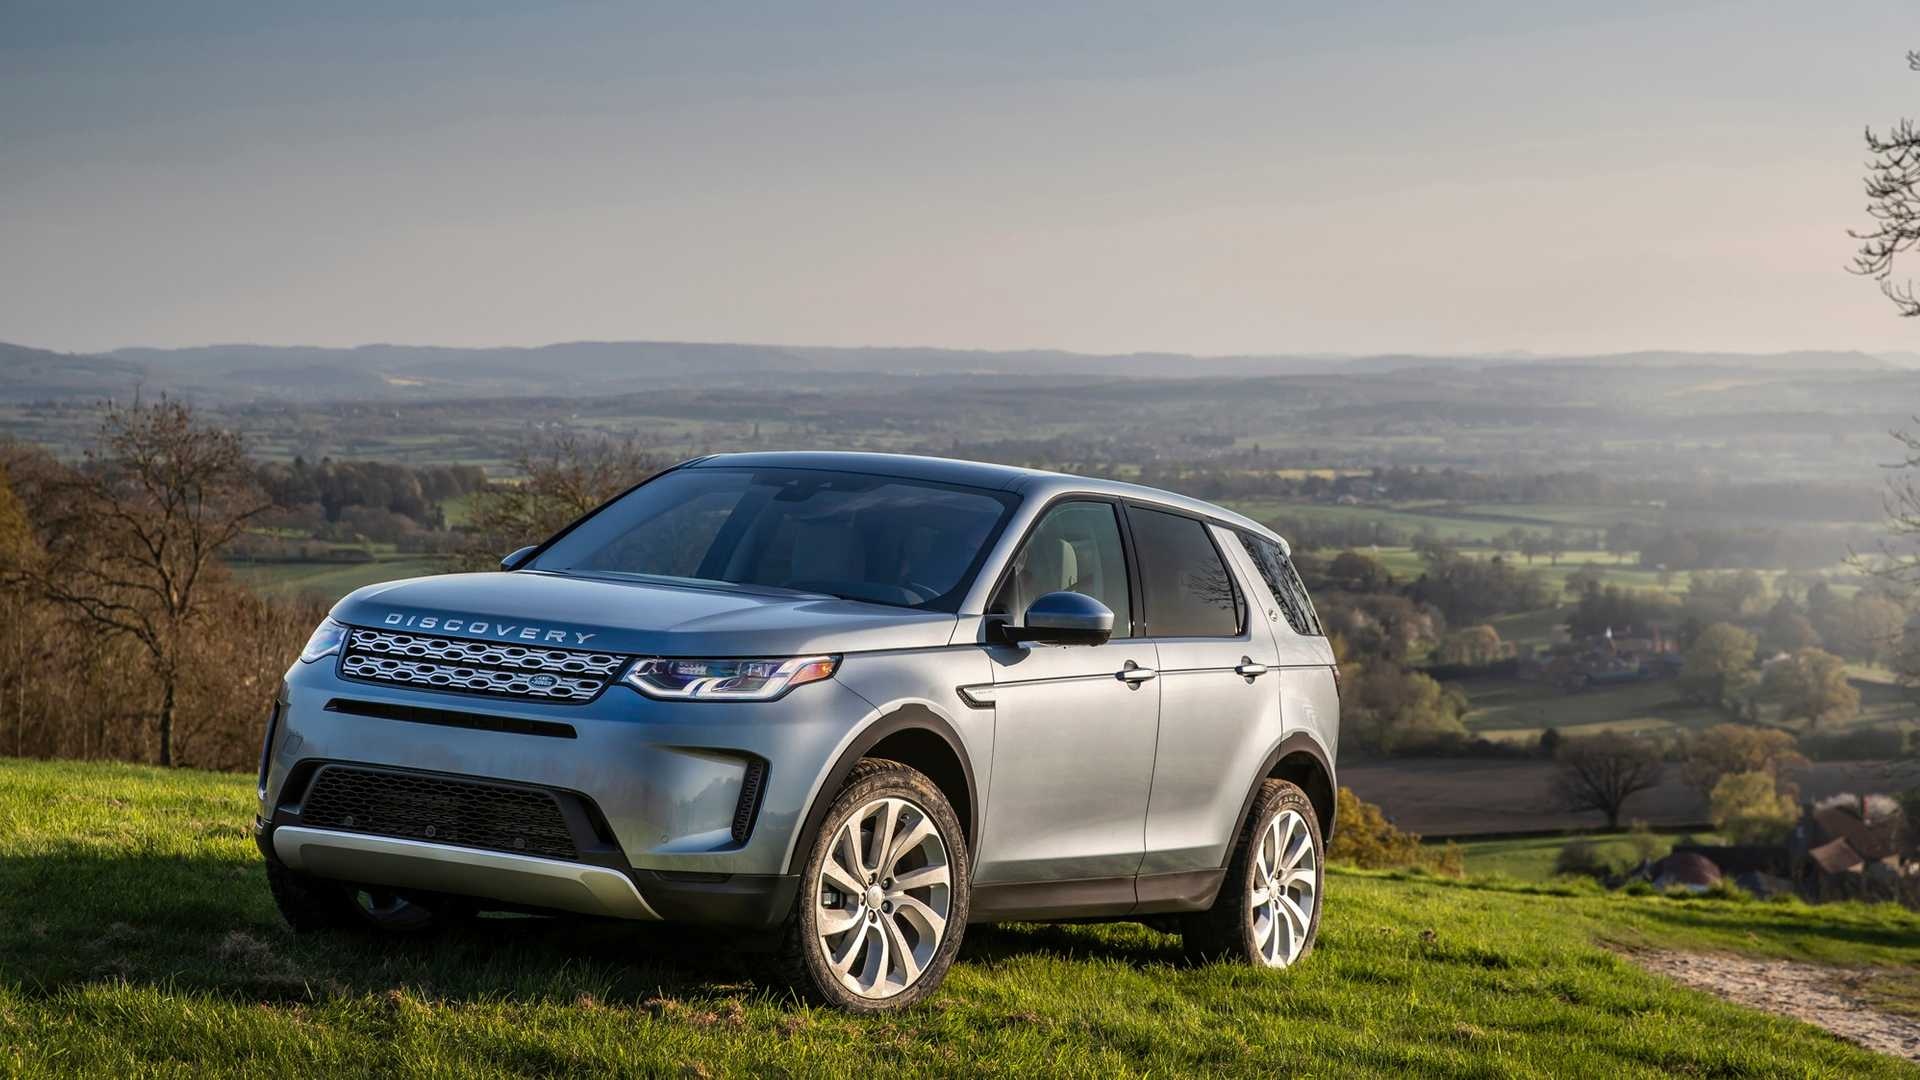 Land Rover Discovery, Adventure seeker, Off-road capability, Luxurious interior, 1920x1080 Full HD Desktop